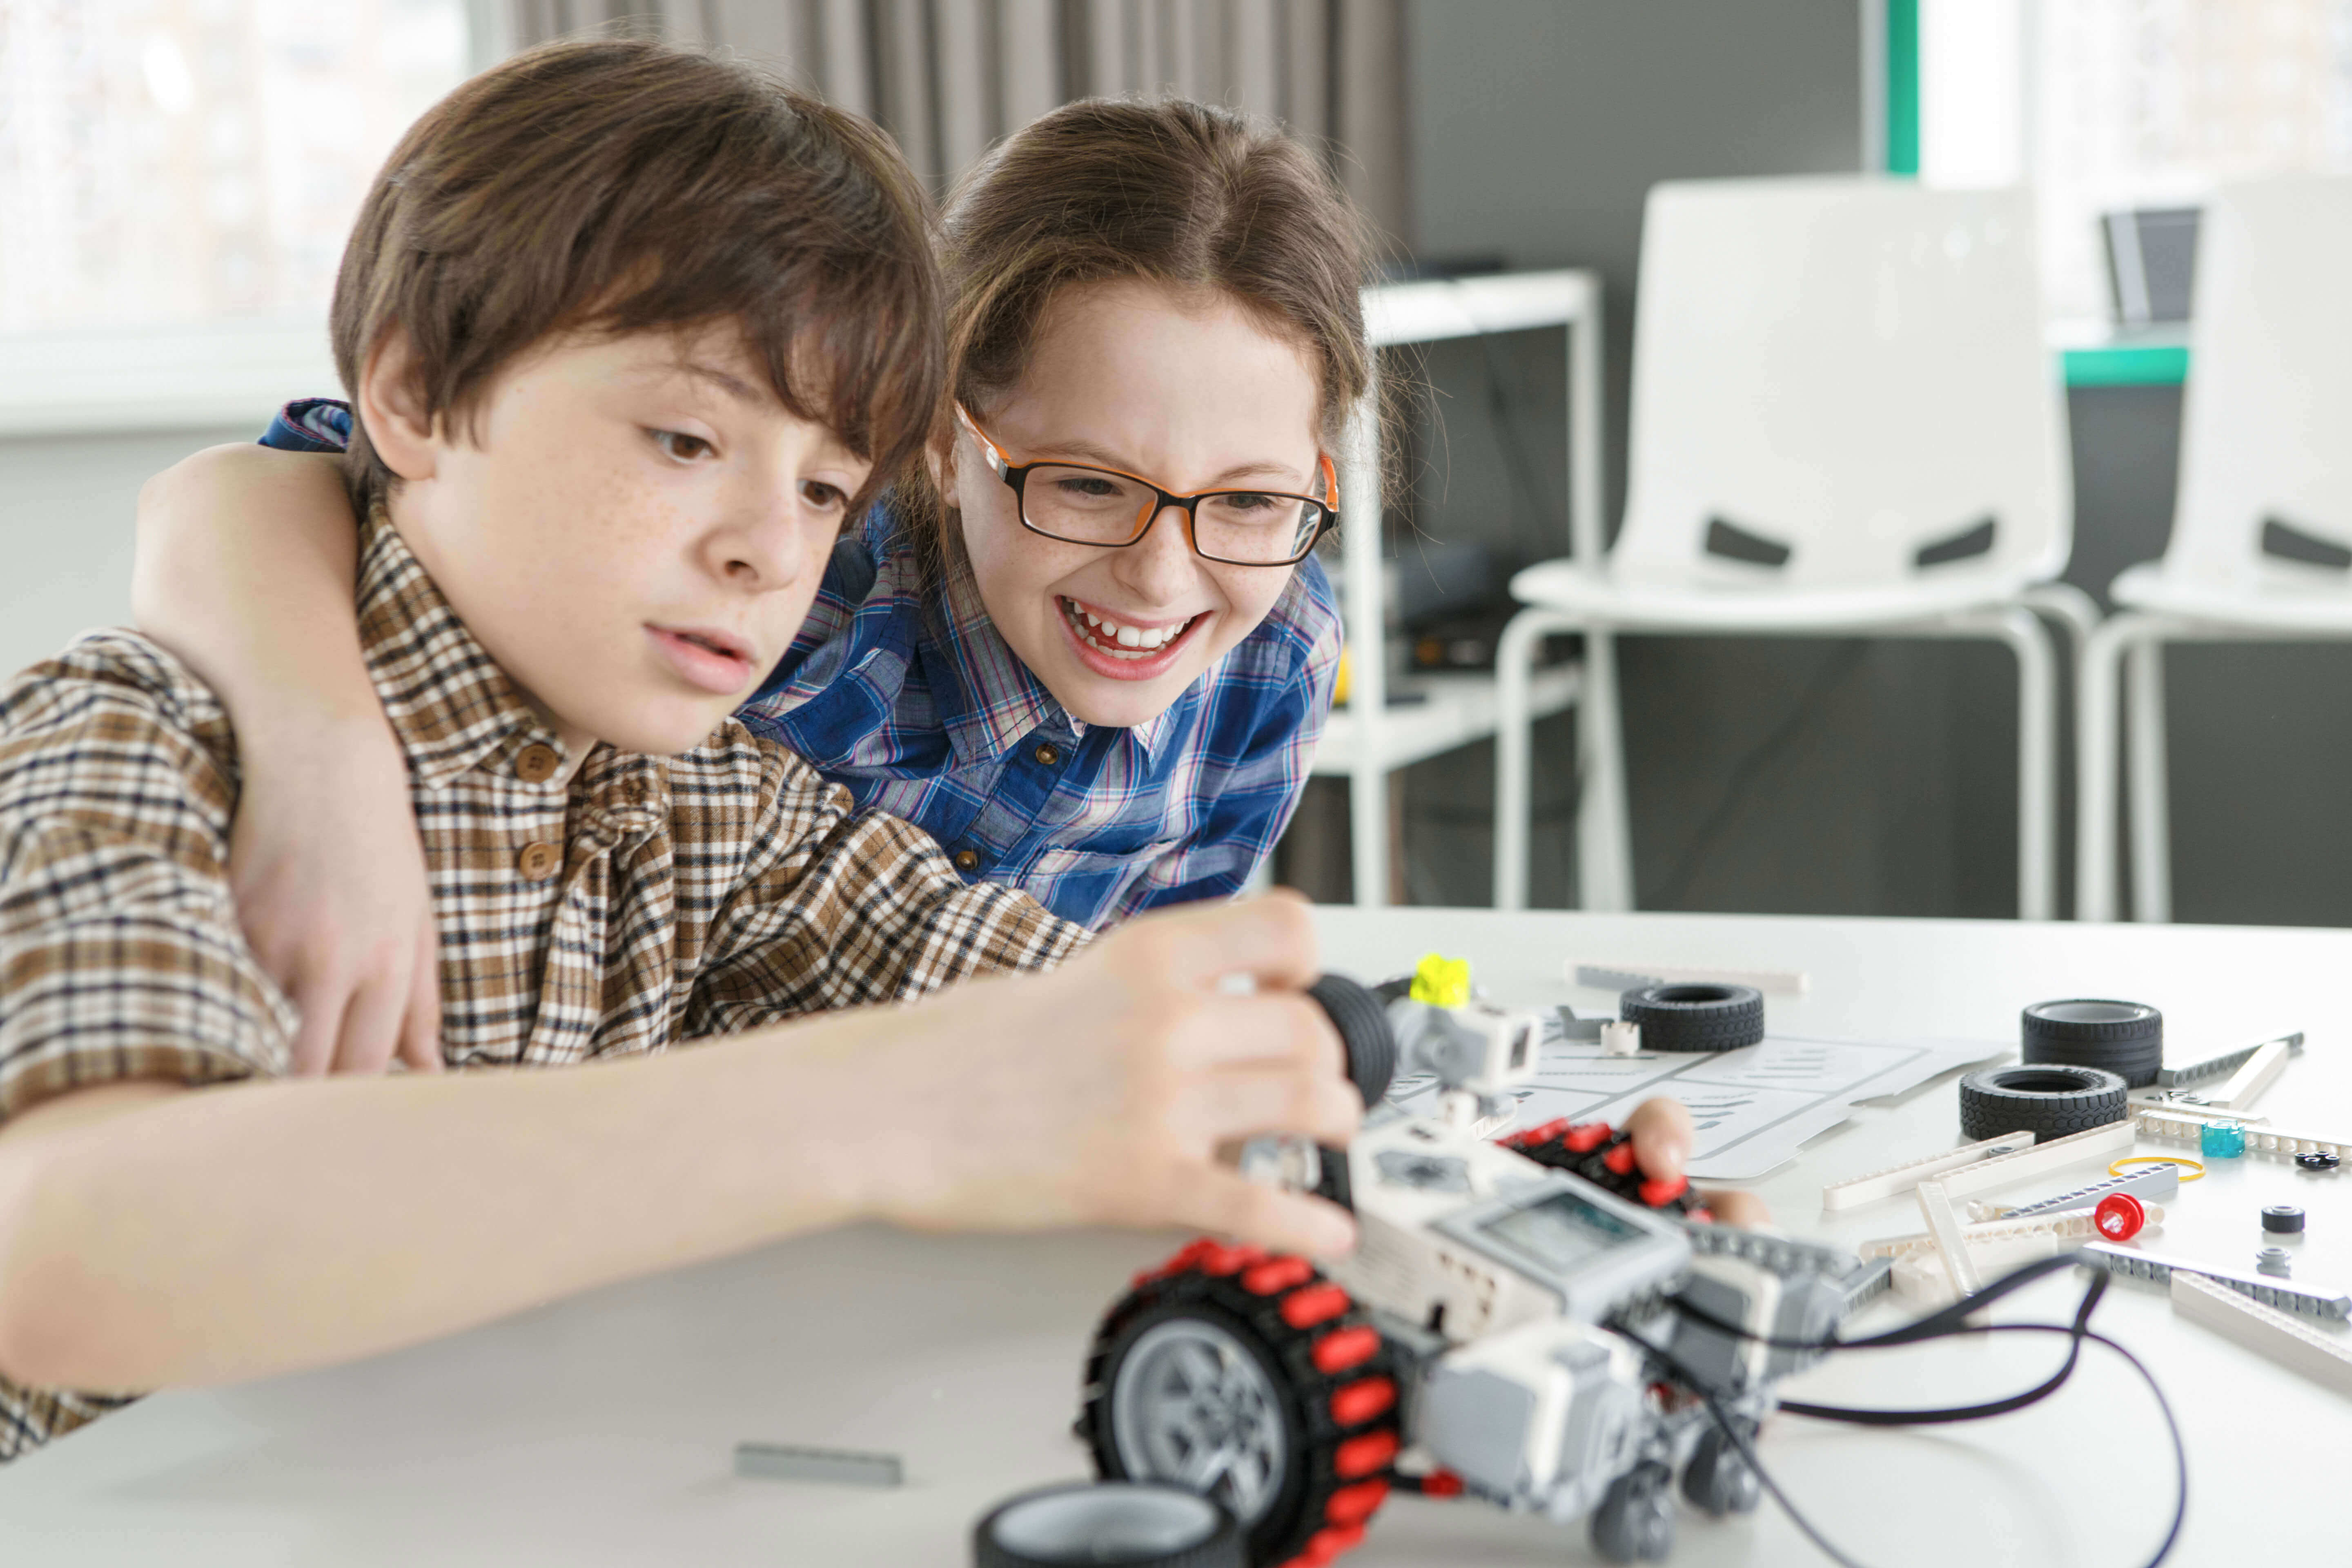 Robotics and Coding for Childens